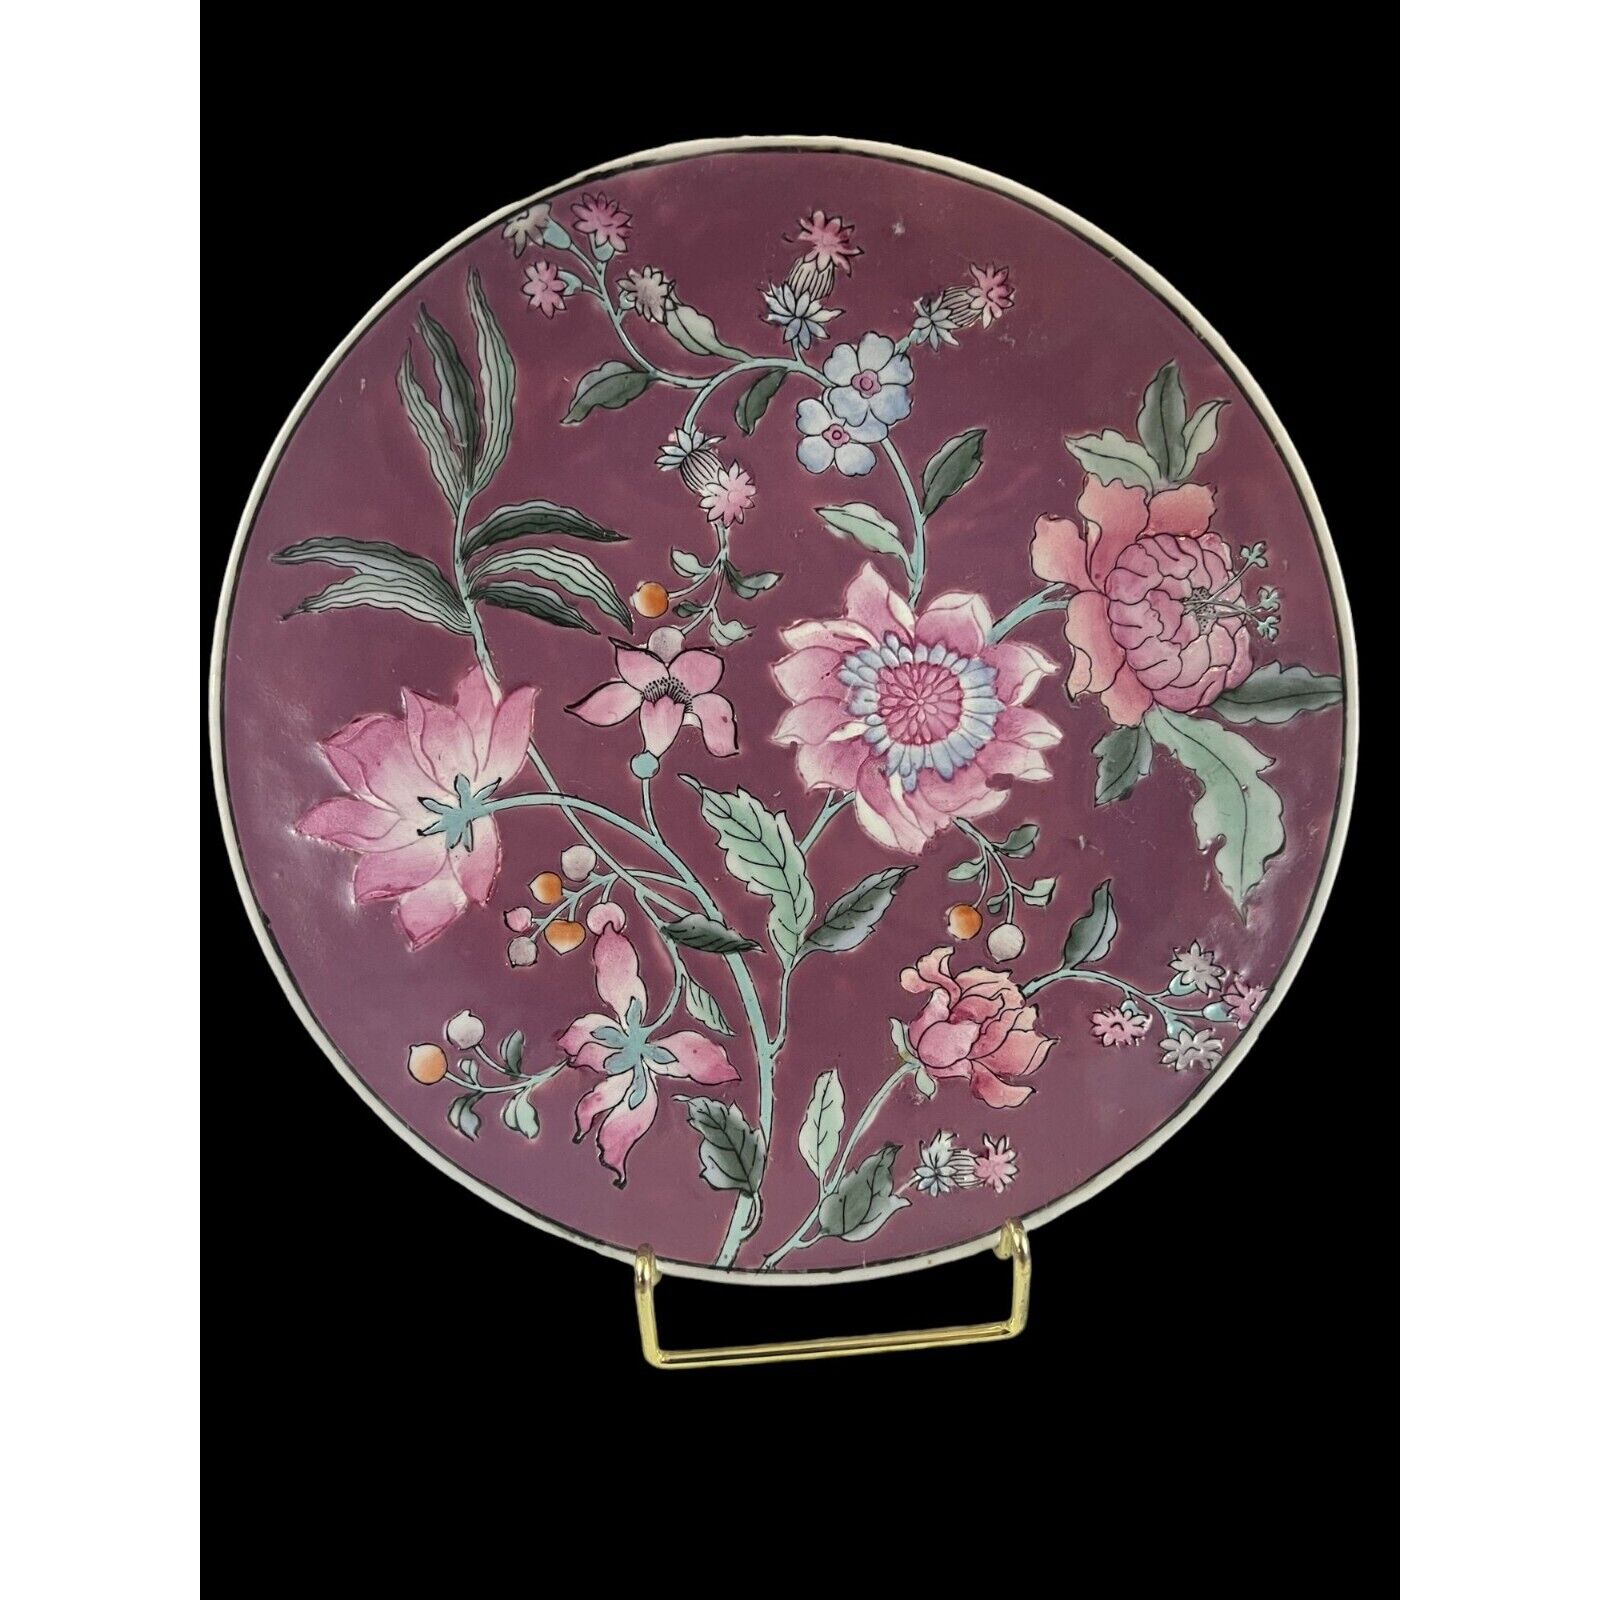 Vintage Mauve Pink Decorative Chinese Floral Home Decor Plate for Wall or Shelf